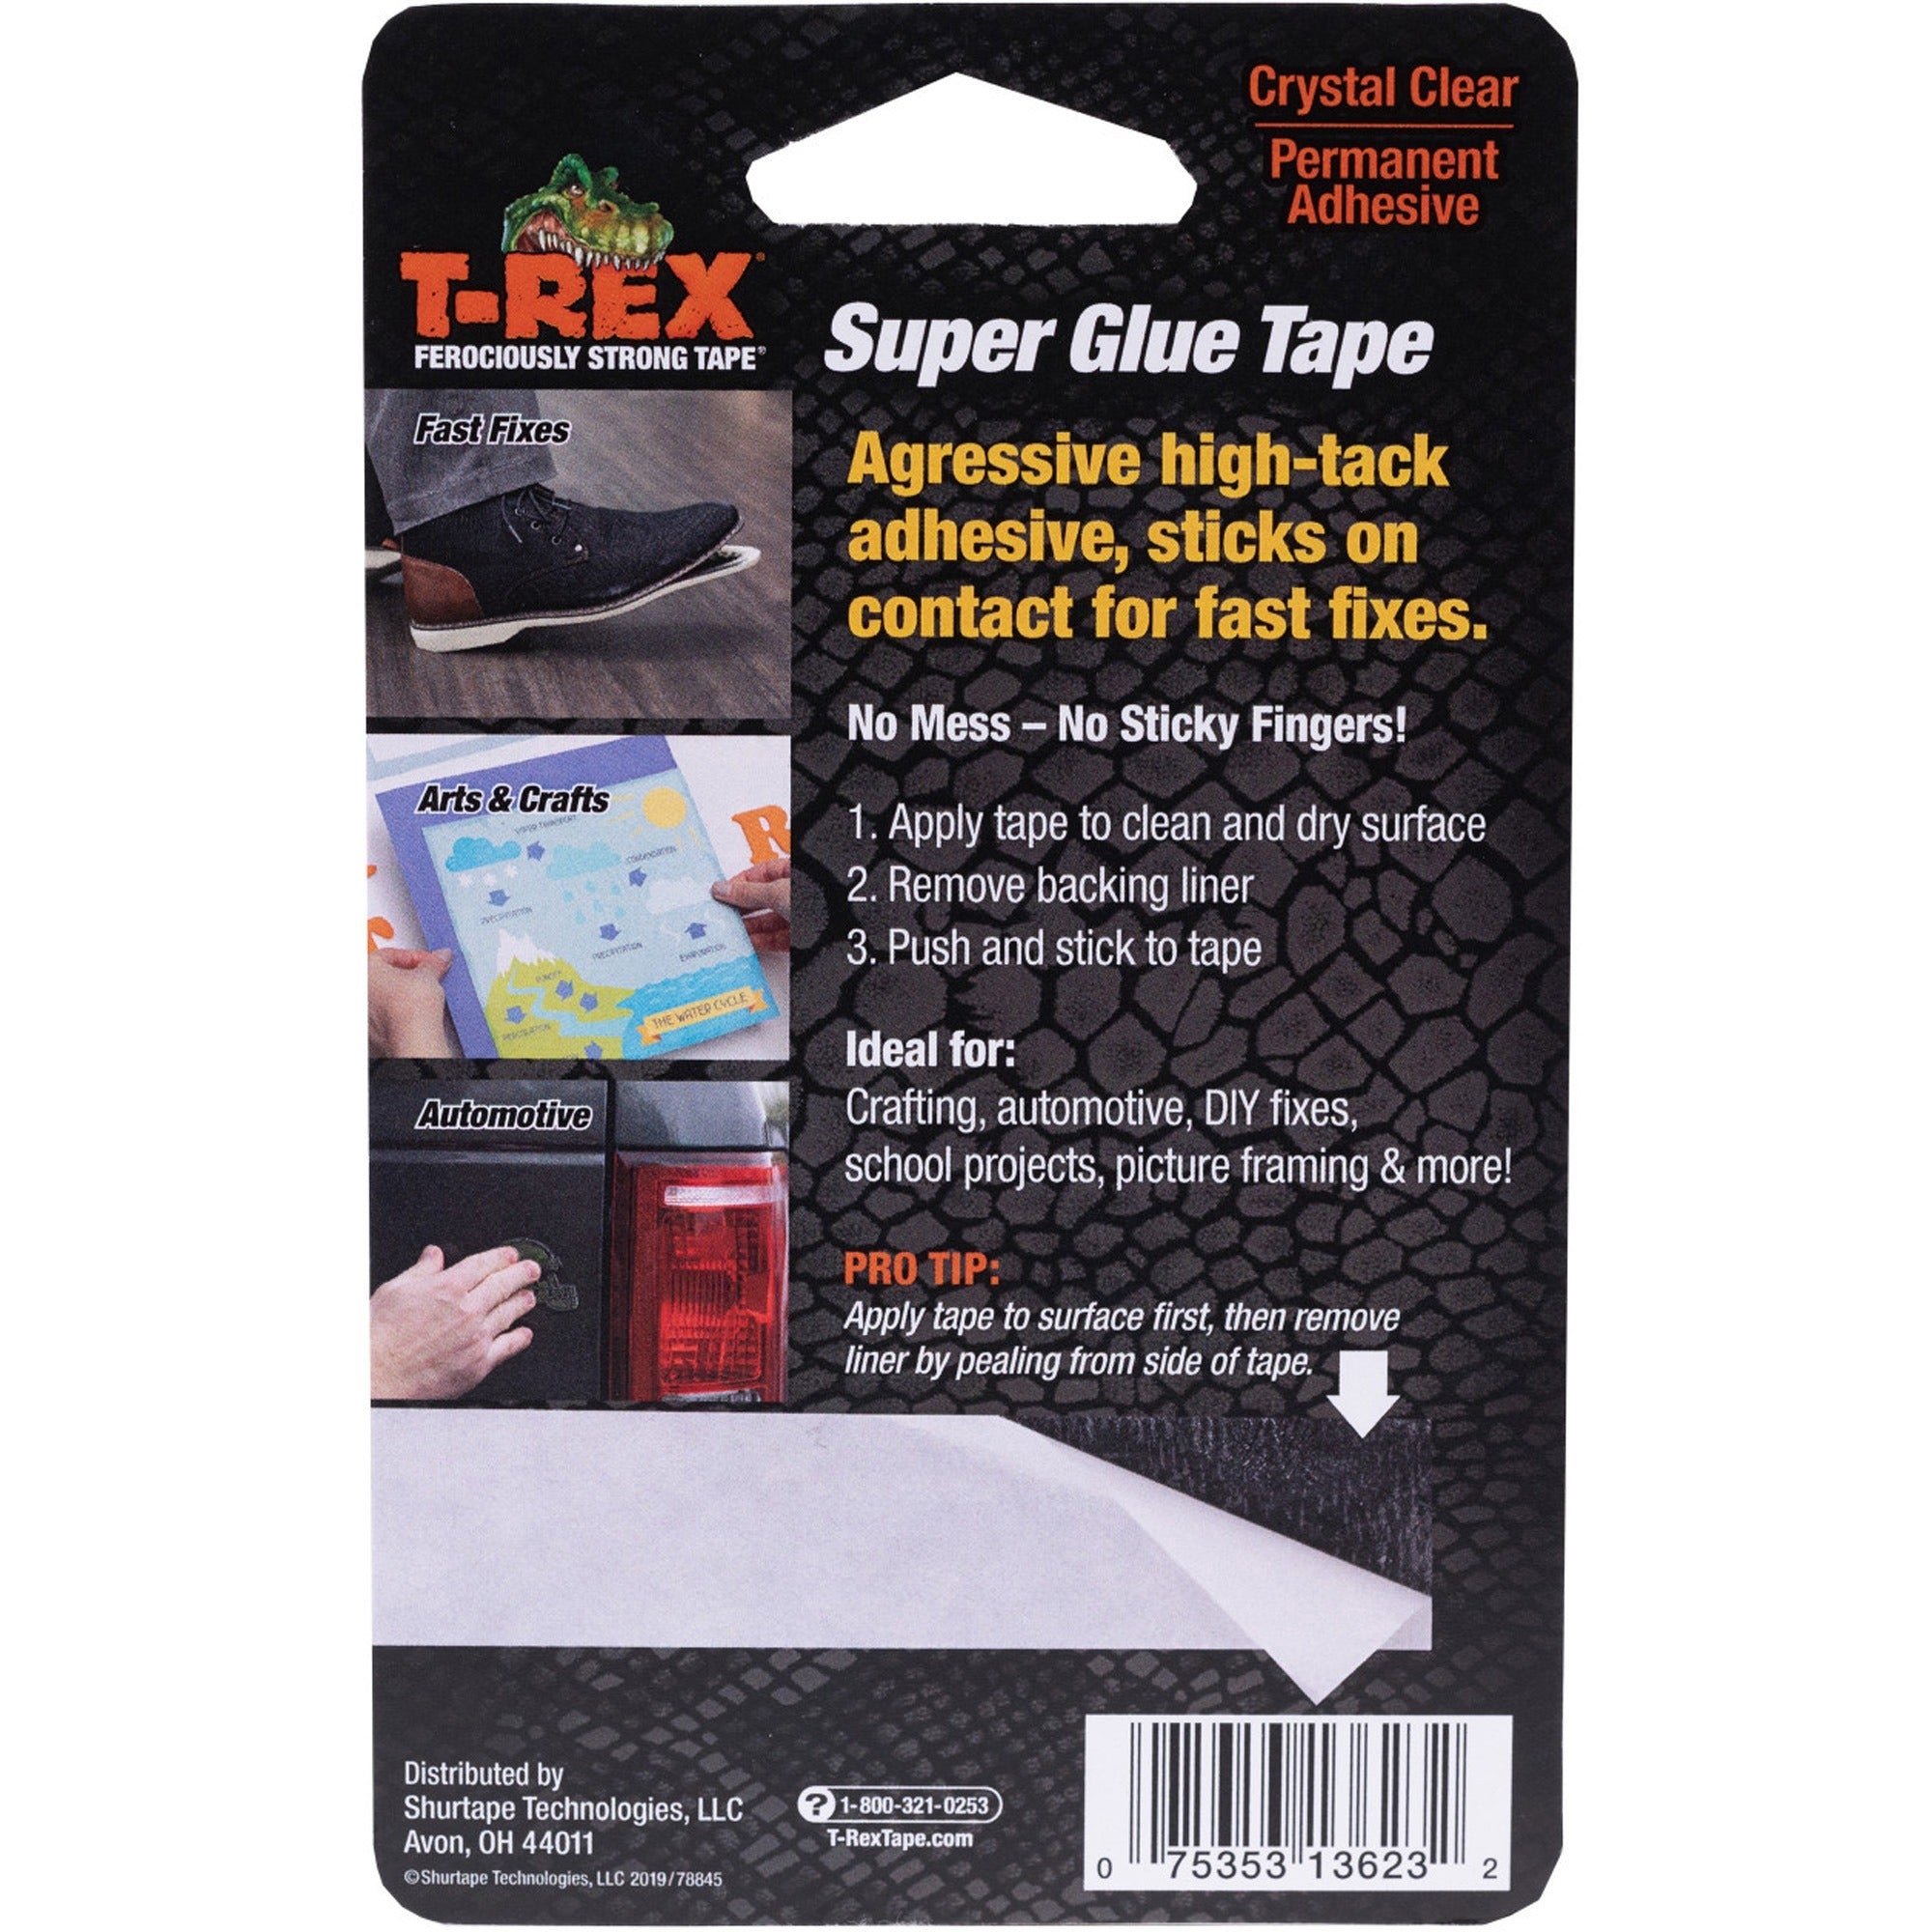 t-rex-double-sided-super-glue-tape-15-ft-length-x-075-width-acrylic-1-each-white_duc286853 - 2